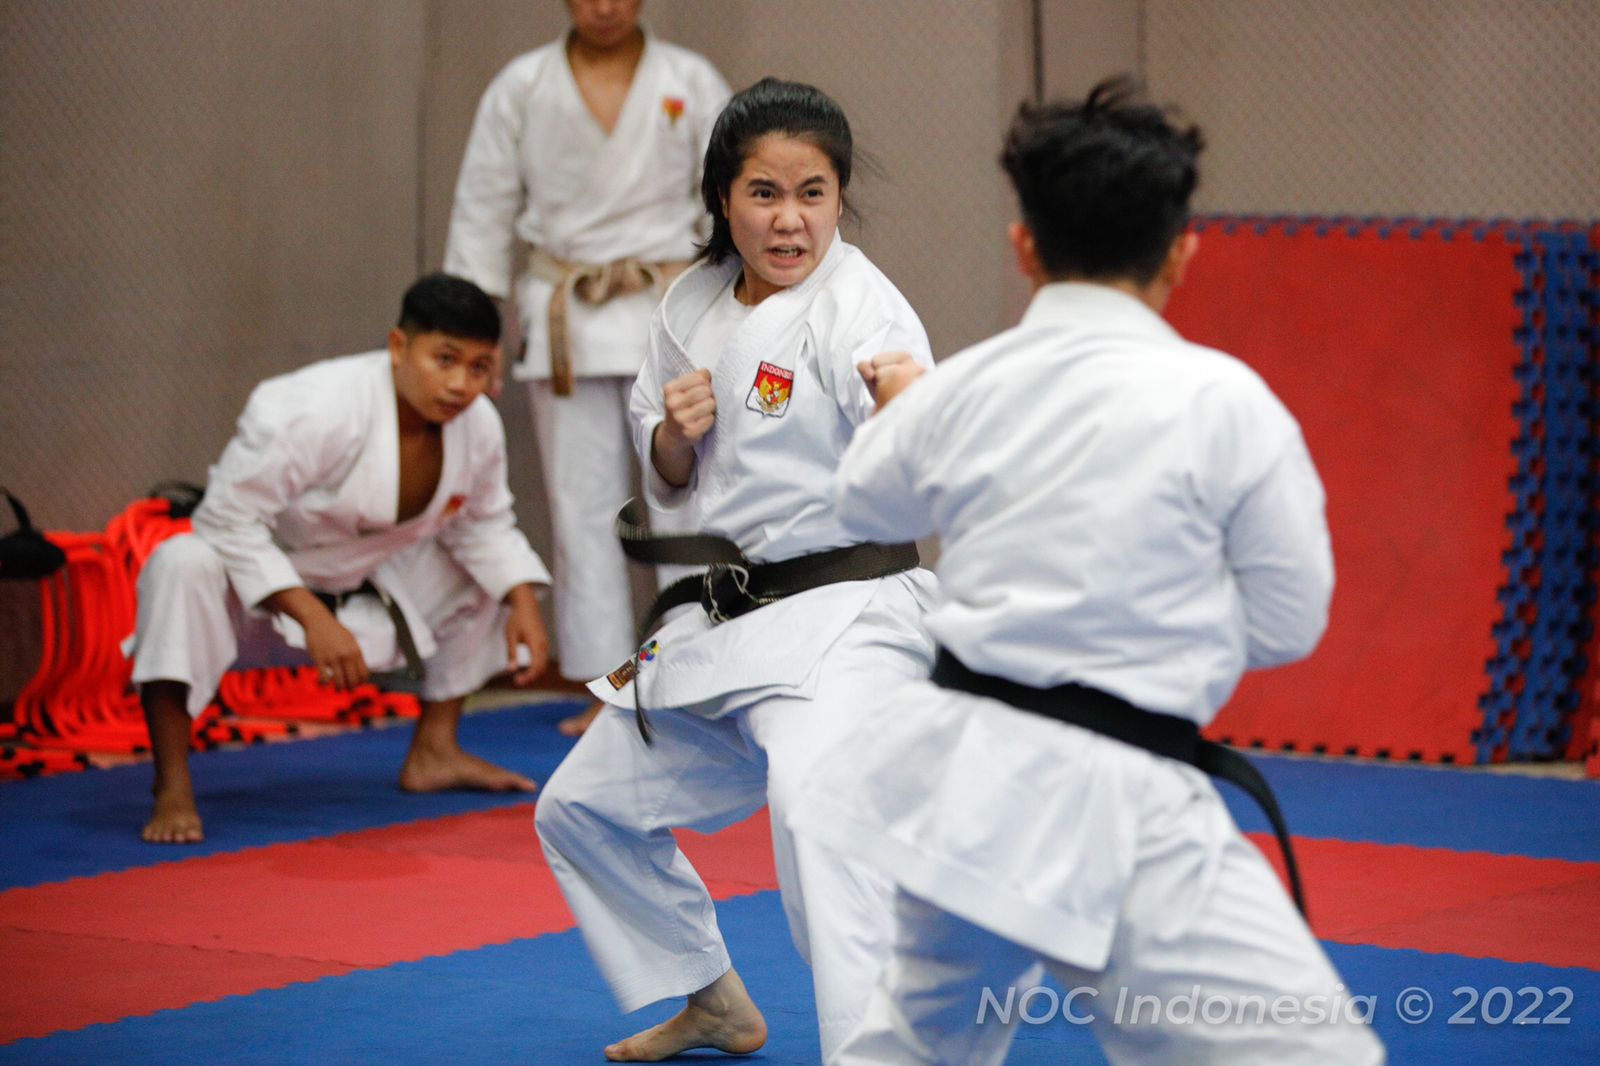 Indonesia Olympic Commitee - Forki to Invite Foreign Athletes for Sparring Partners